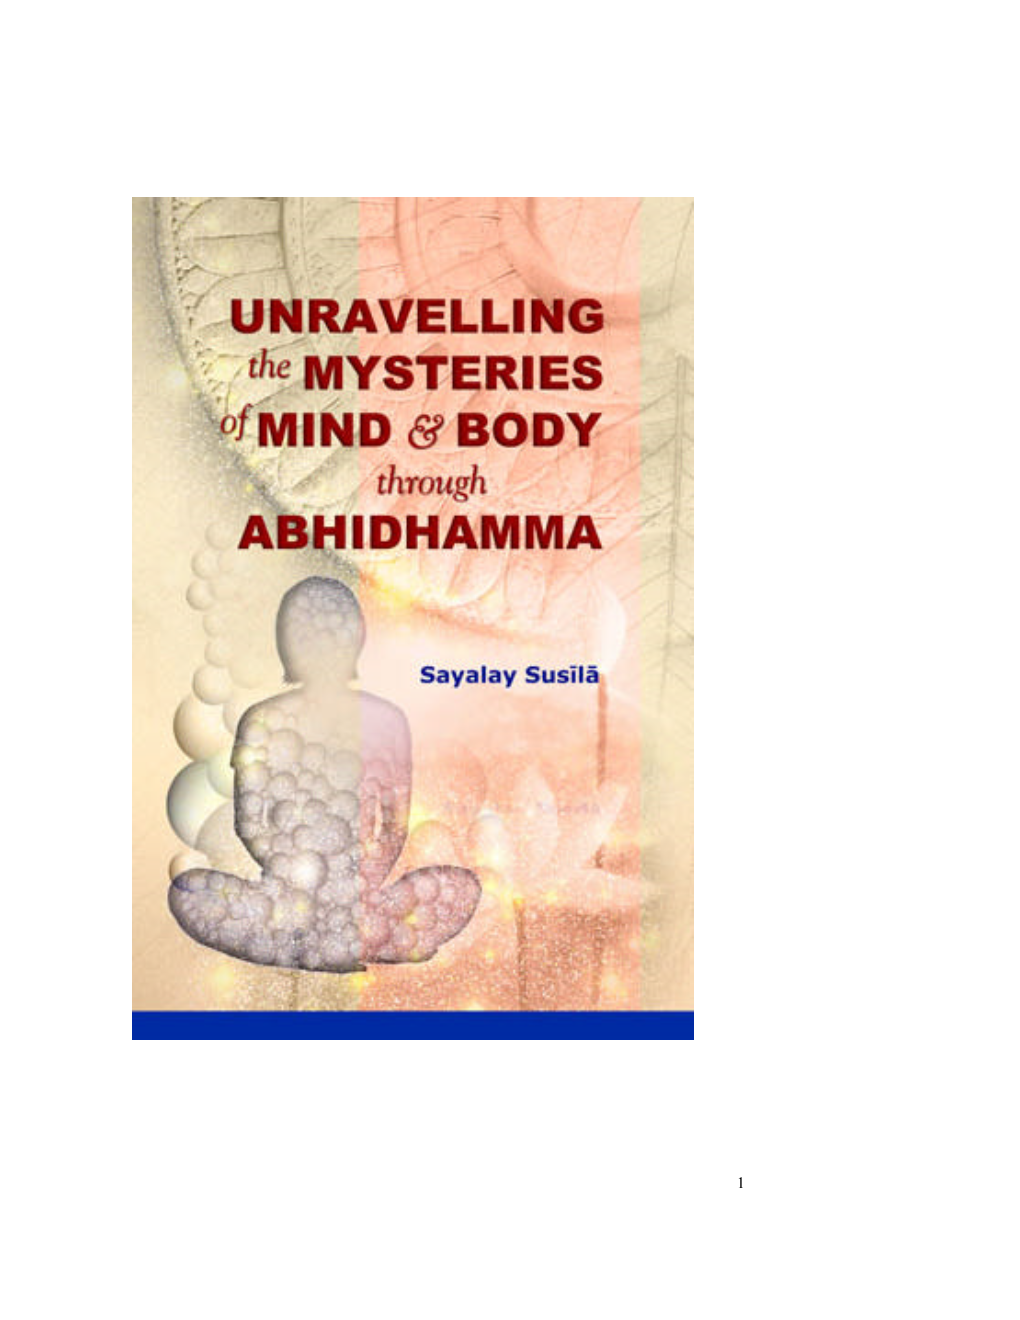 Unravelling the Mysteries of Mind and Body Through Abhidhamma